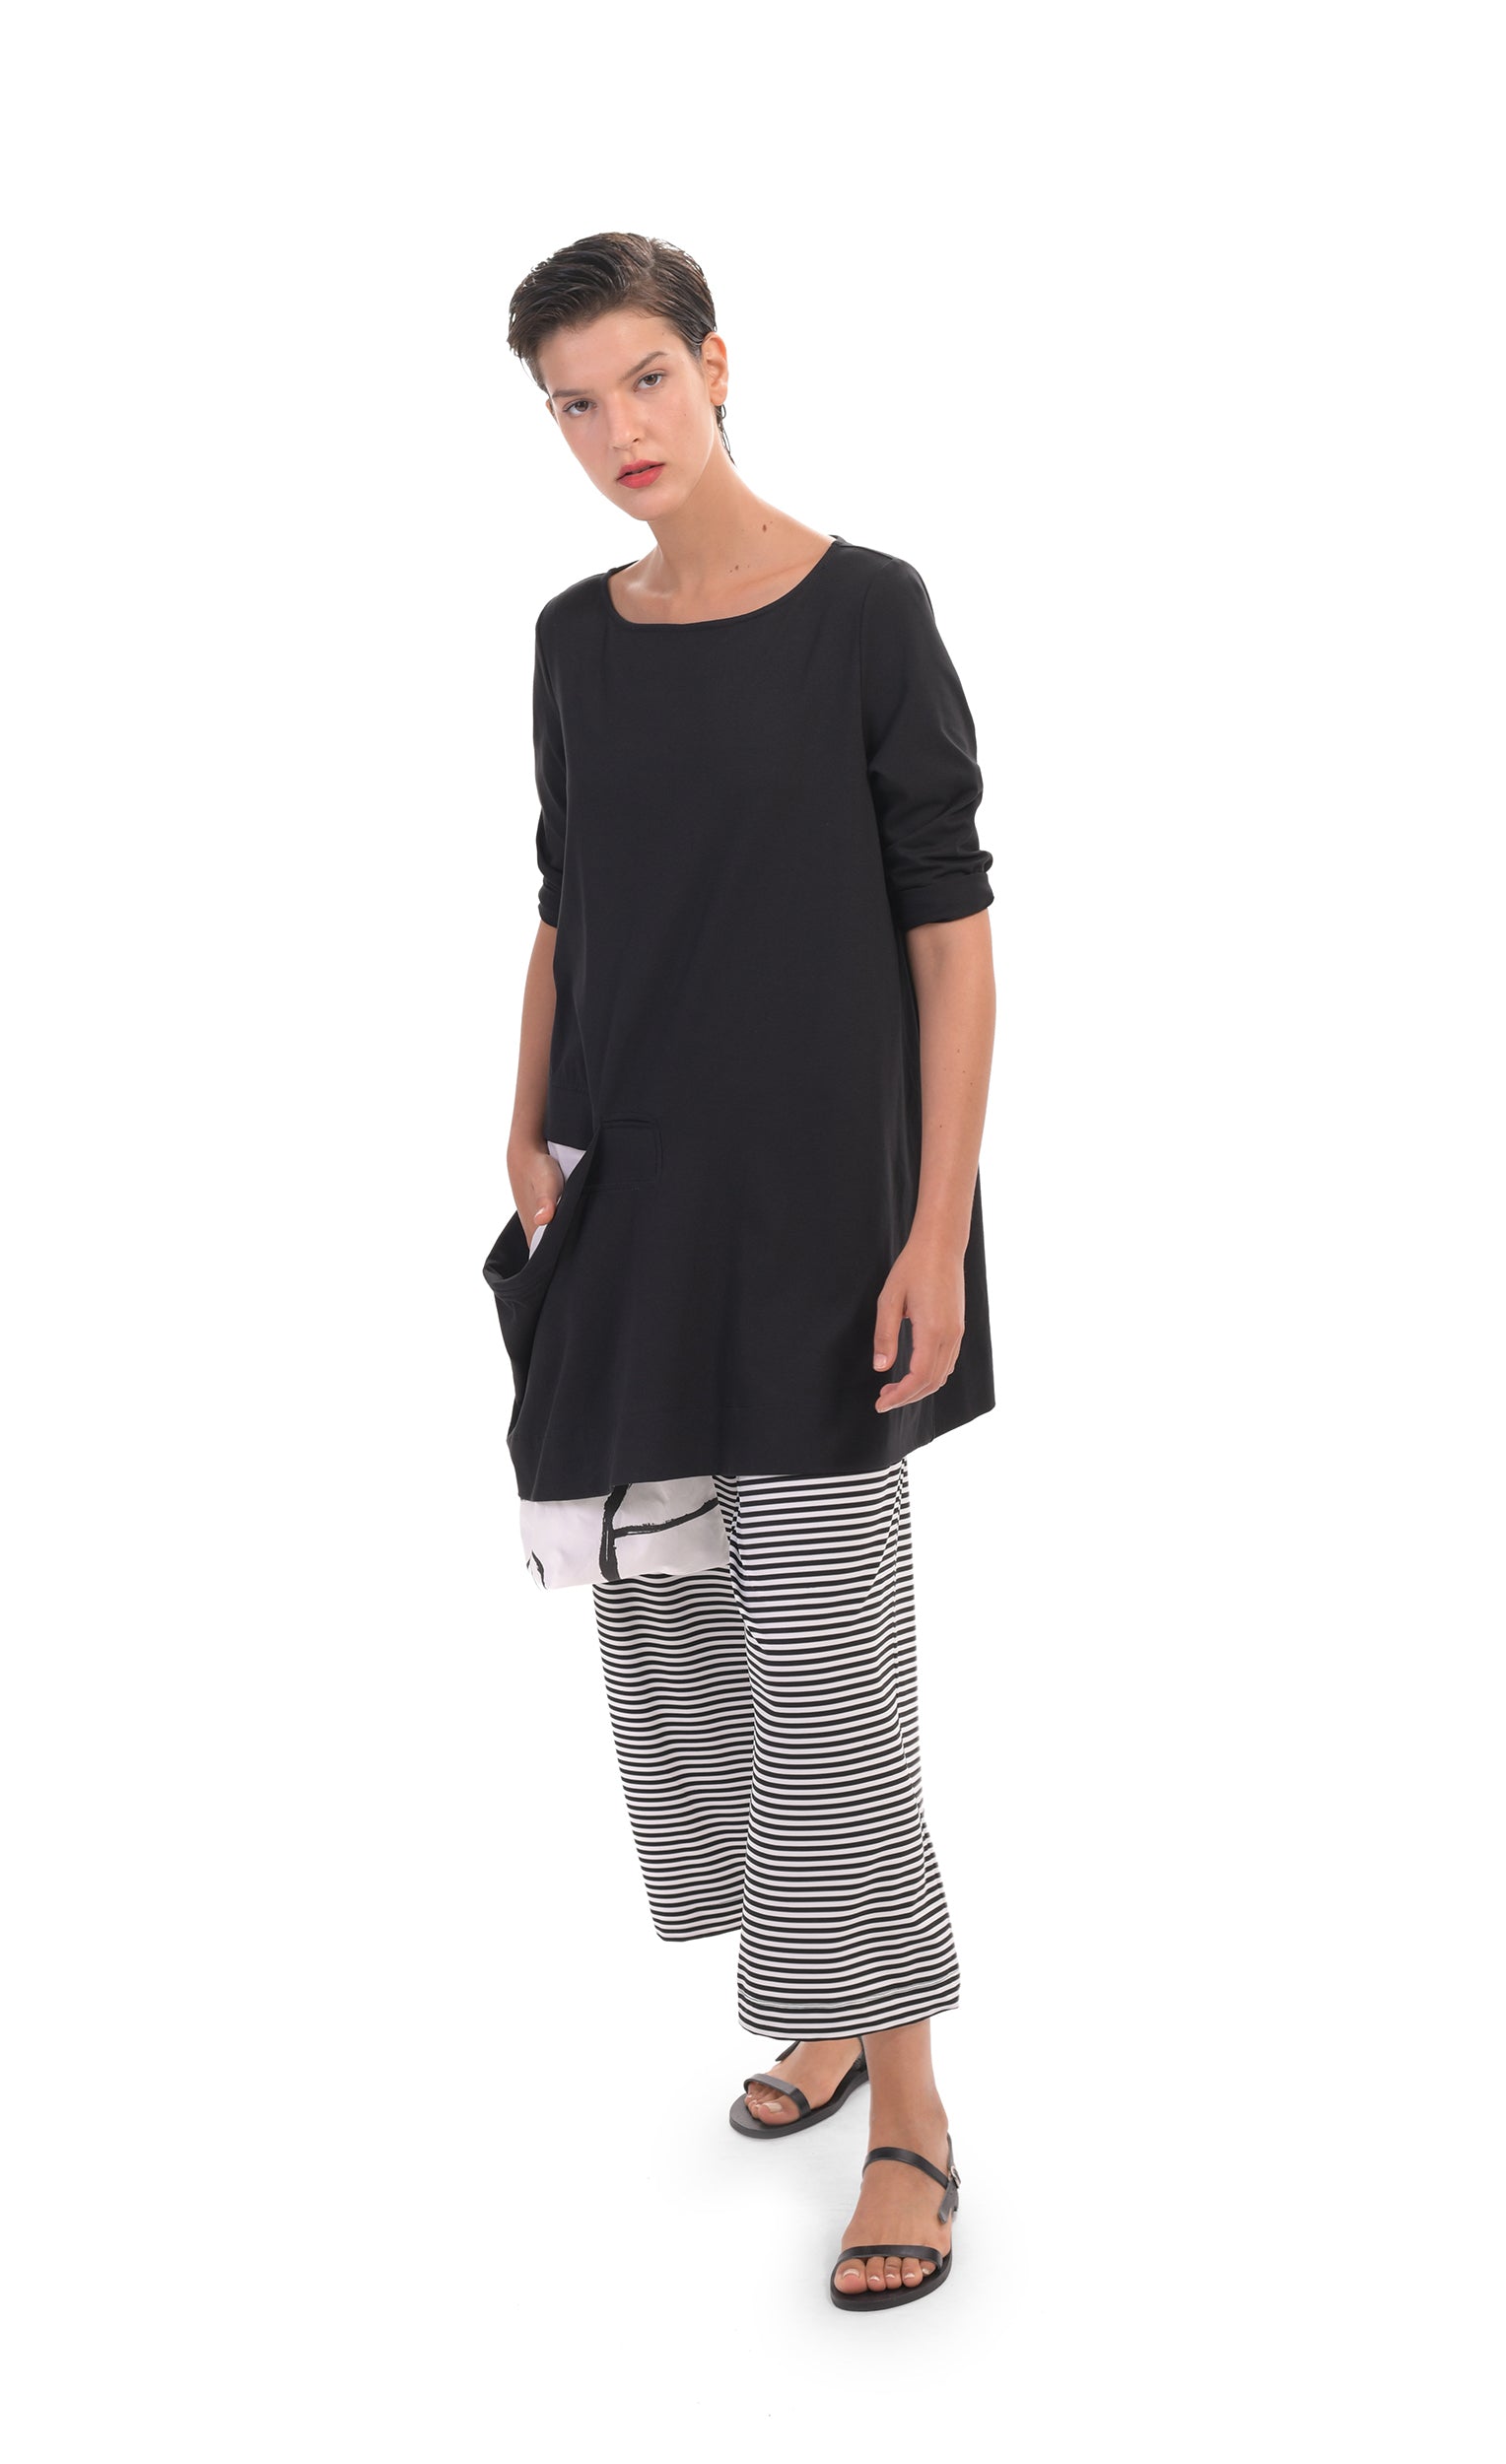 Front full body view of a woman wearing the alembika peek-a-boo pocket tunic with black and white striped pants. The top has 3/4 length sleeves. It is black with a draped open pocket. The pocket is lined with a white and black circle/capsule like print that hangs down below the hem.